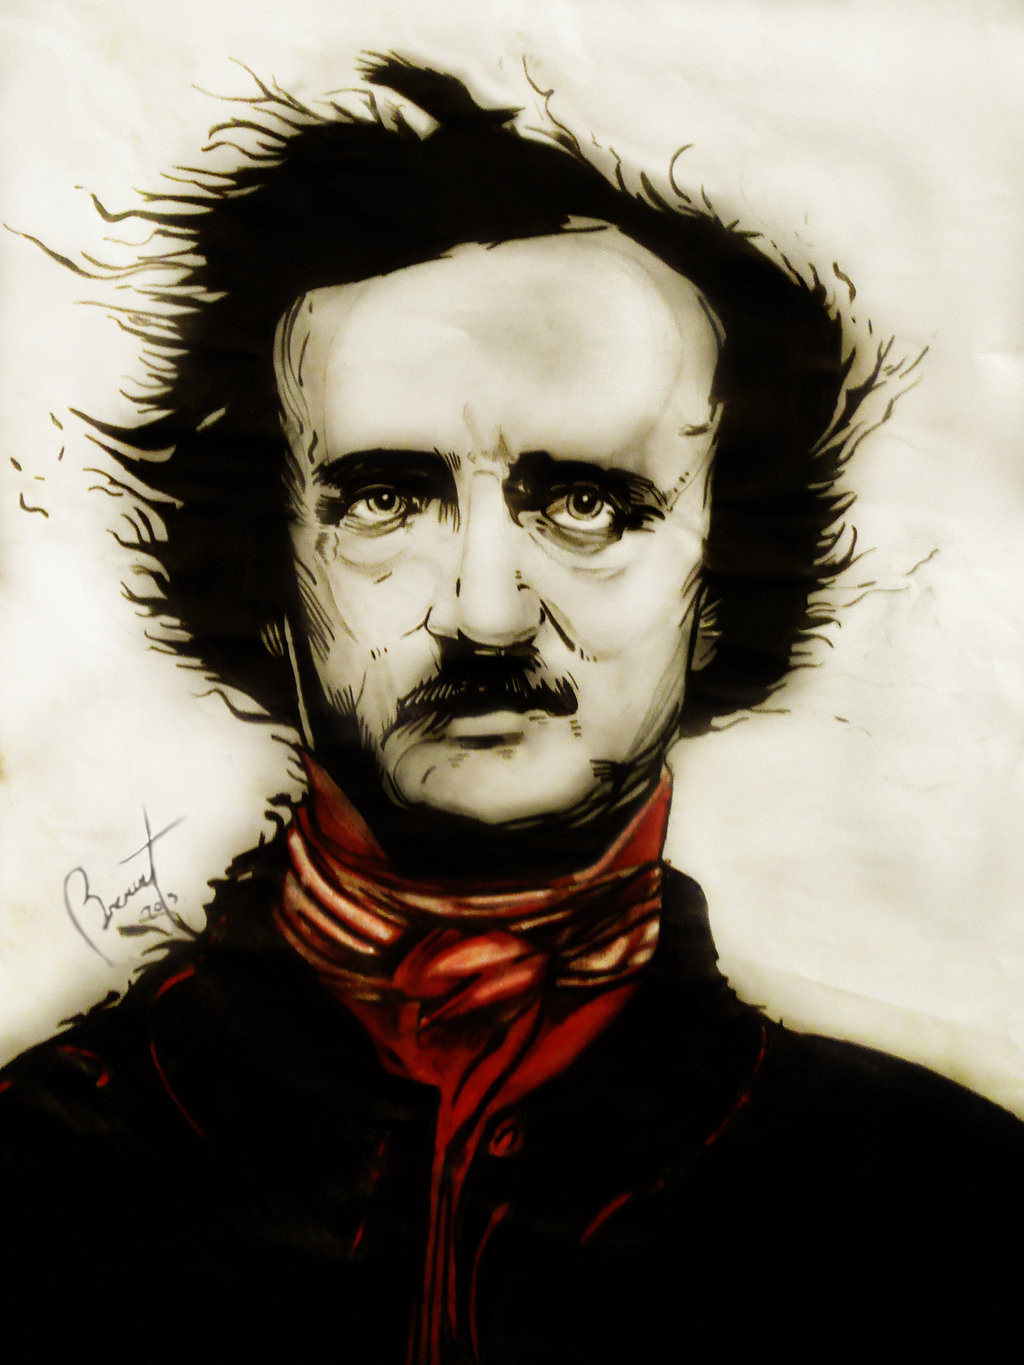 The Masque of the Red Death by Edgar Allan Poe